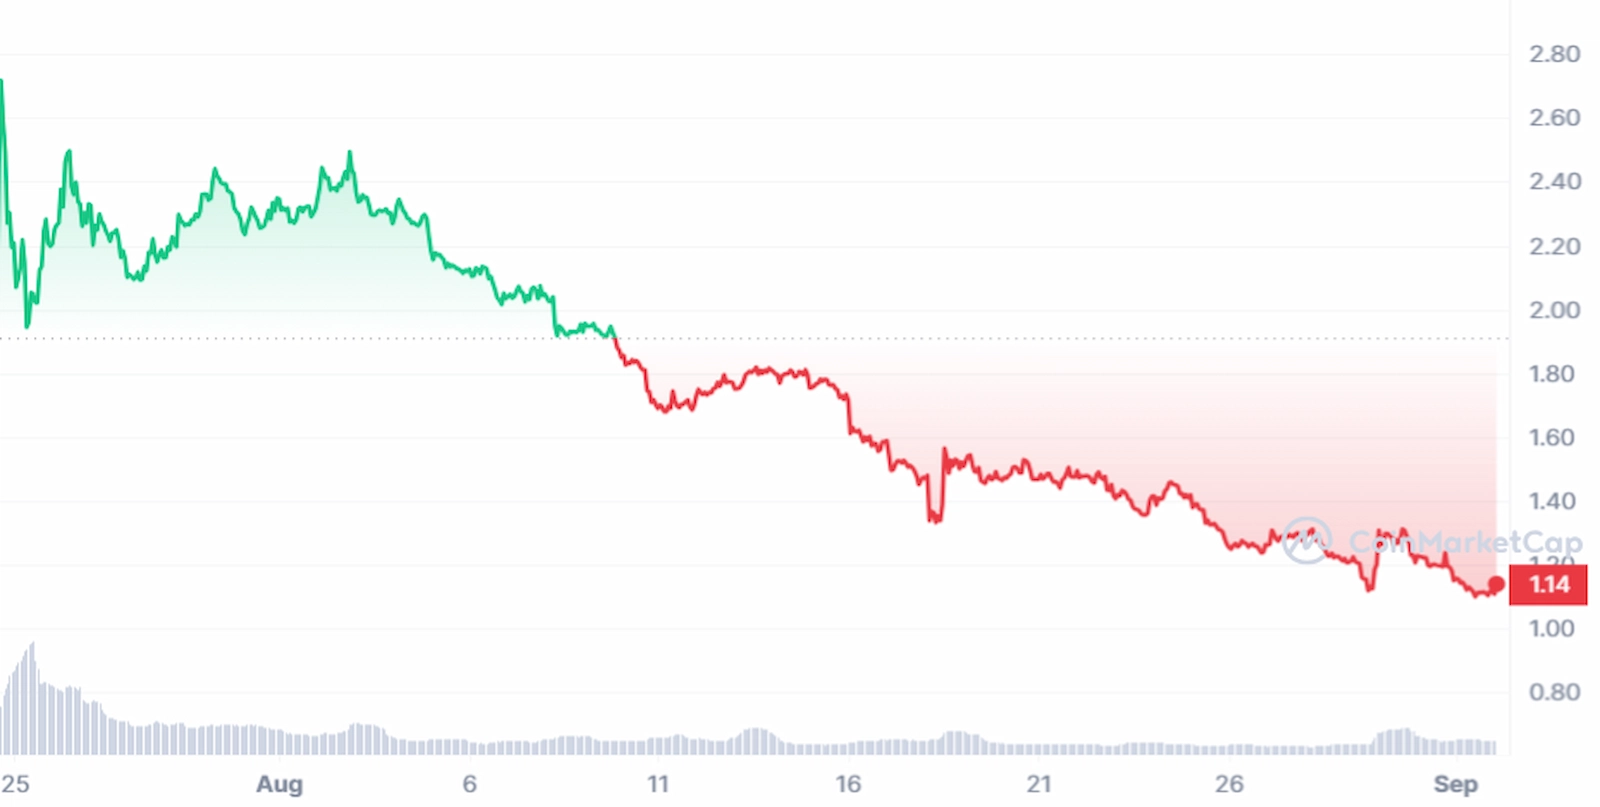 WLD Token's price action since launch. 